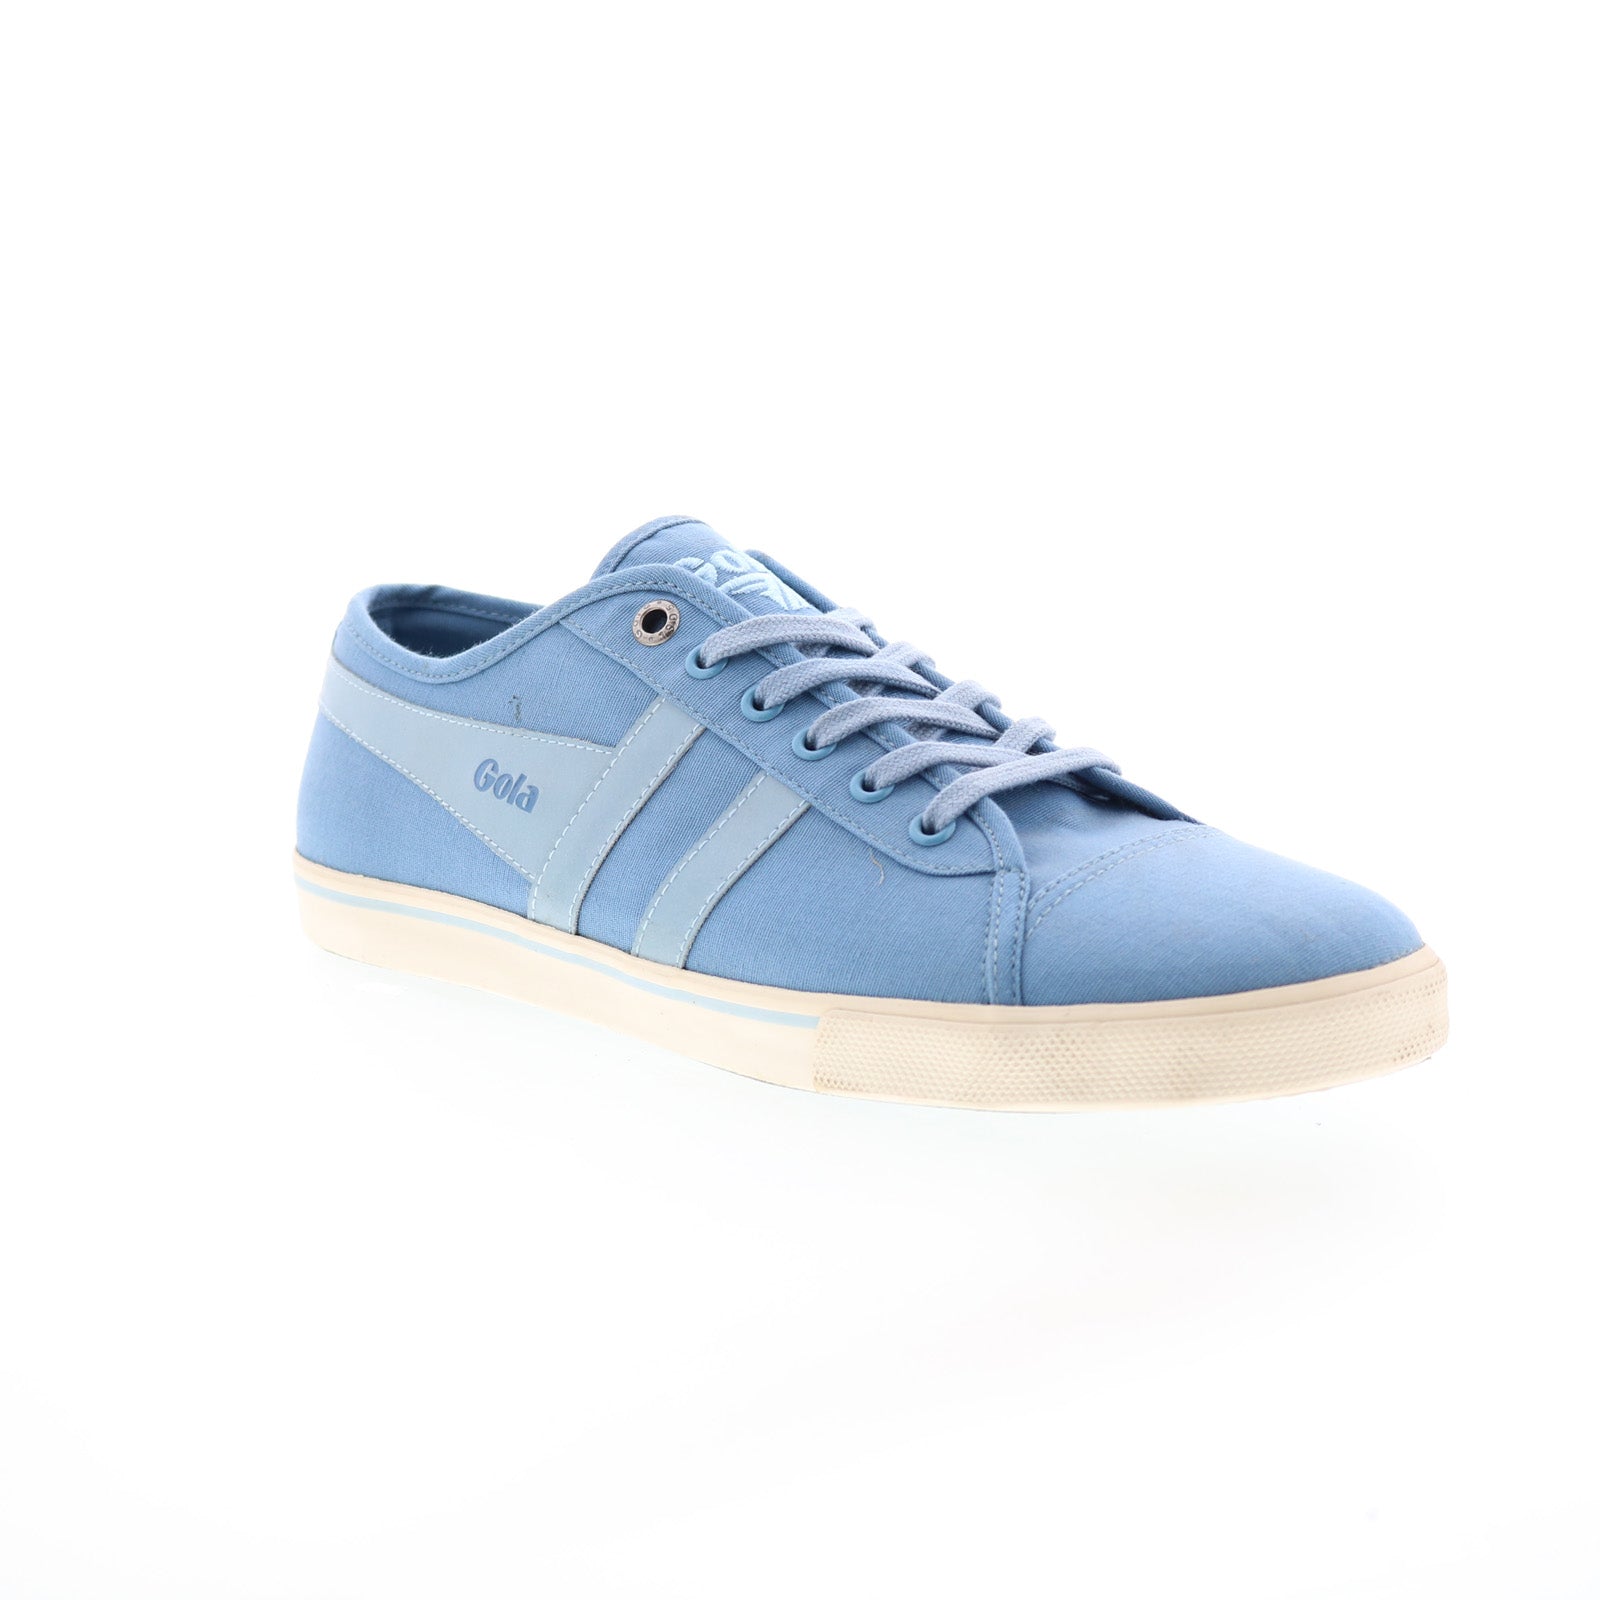 Gola Jasmine CLA818 Womens Blue Canvas Lace Up Lifestyle Sneakers Shoes